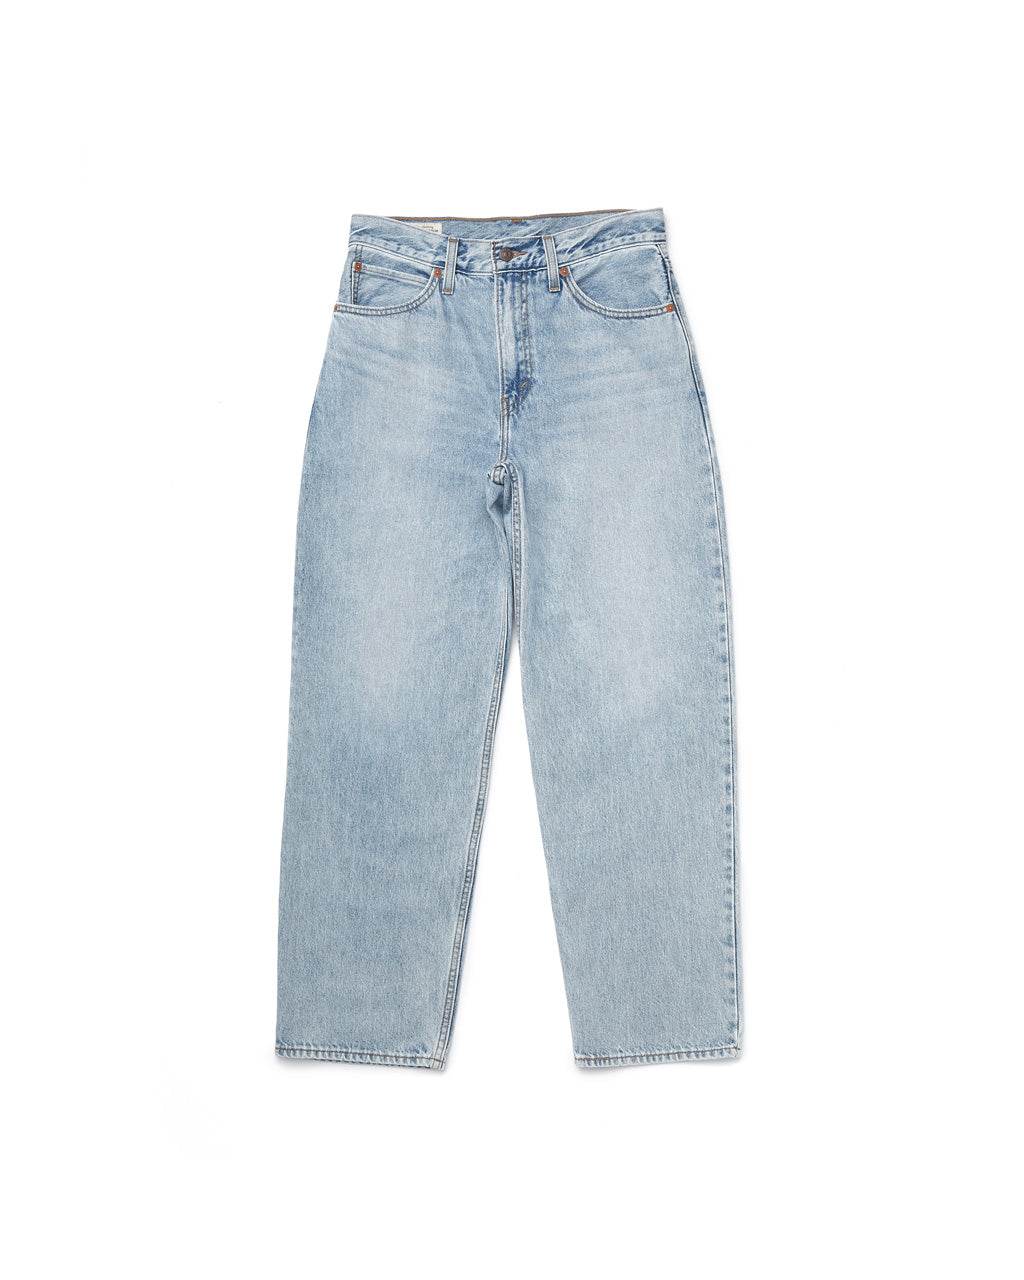 Dad Jean - Charlie Boy by levi's - jeans - ban.do